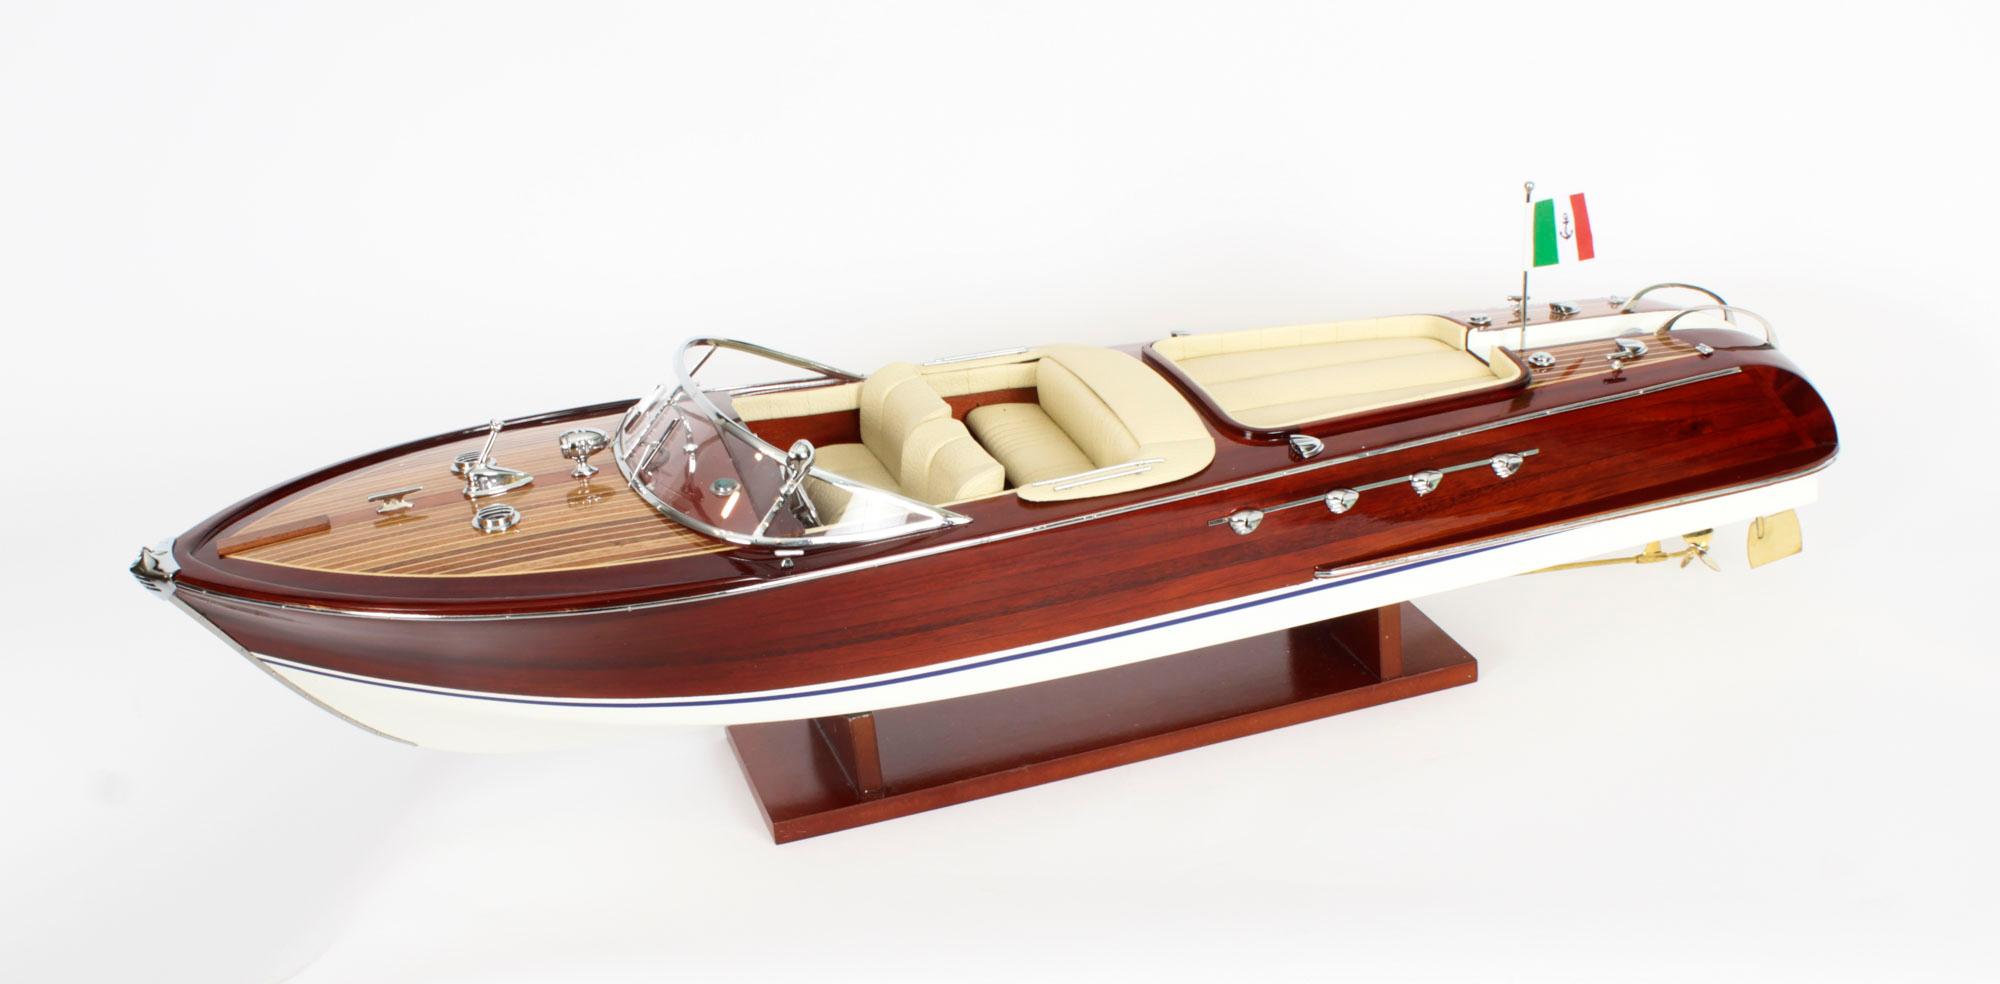 This is an exceptional handbuilt model of the “Riva Aquarama”, a luxury wooden launch built by the Italian yacht builder Riva, dating from the late 20th century.

In production from 1962 to 1996, the Aquarama was the most famous of Carlo Riva’s